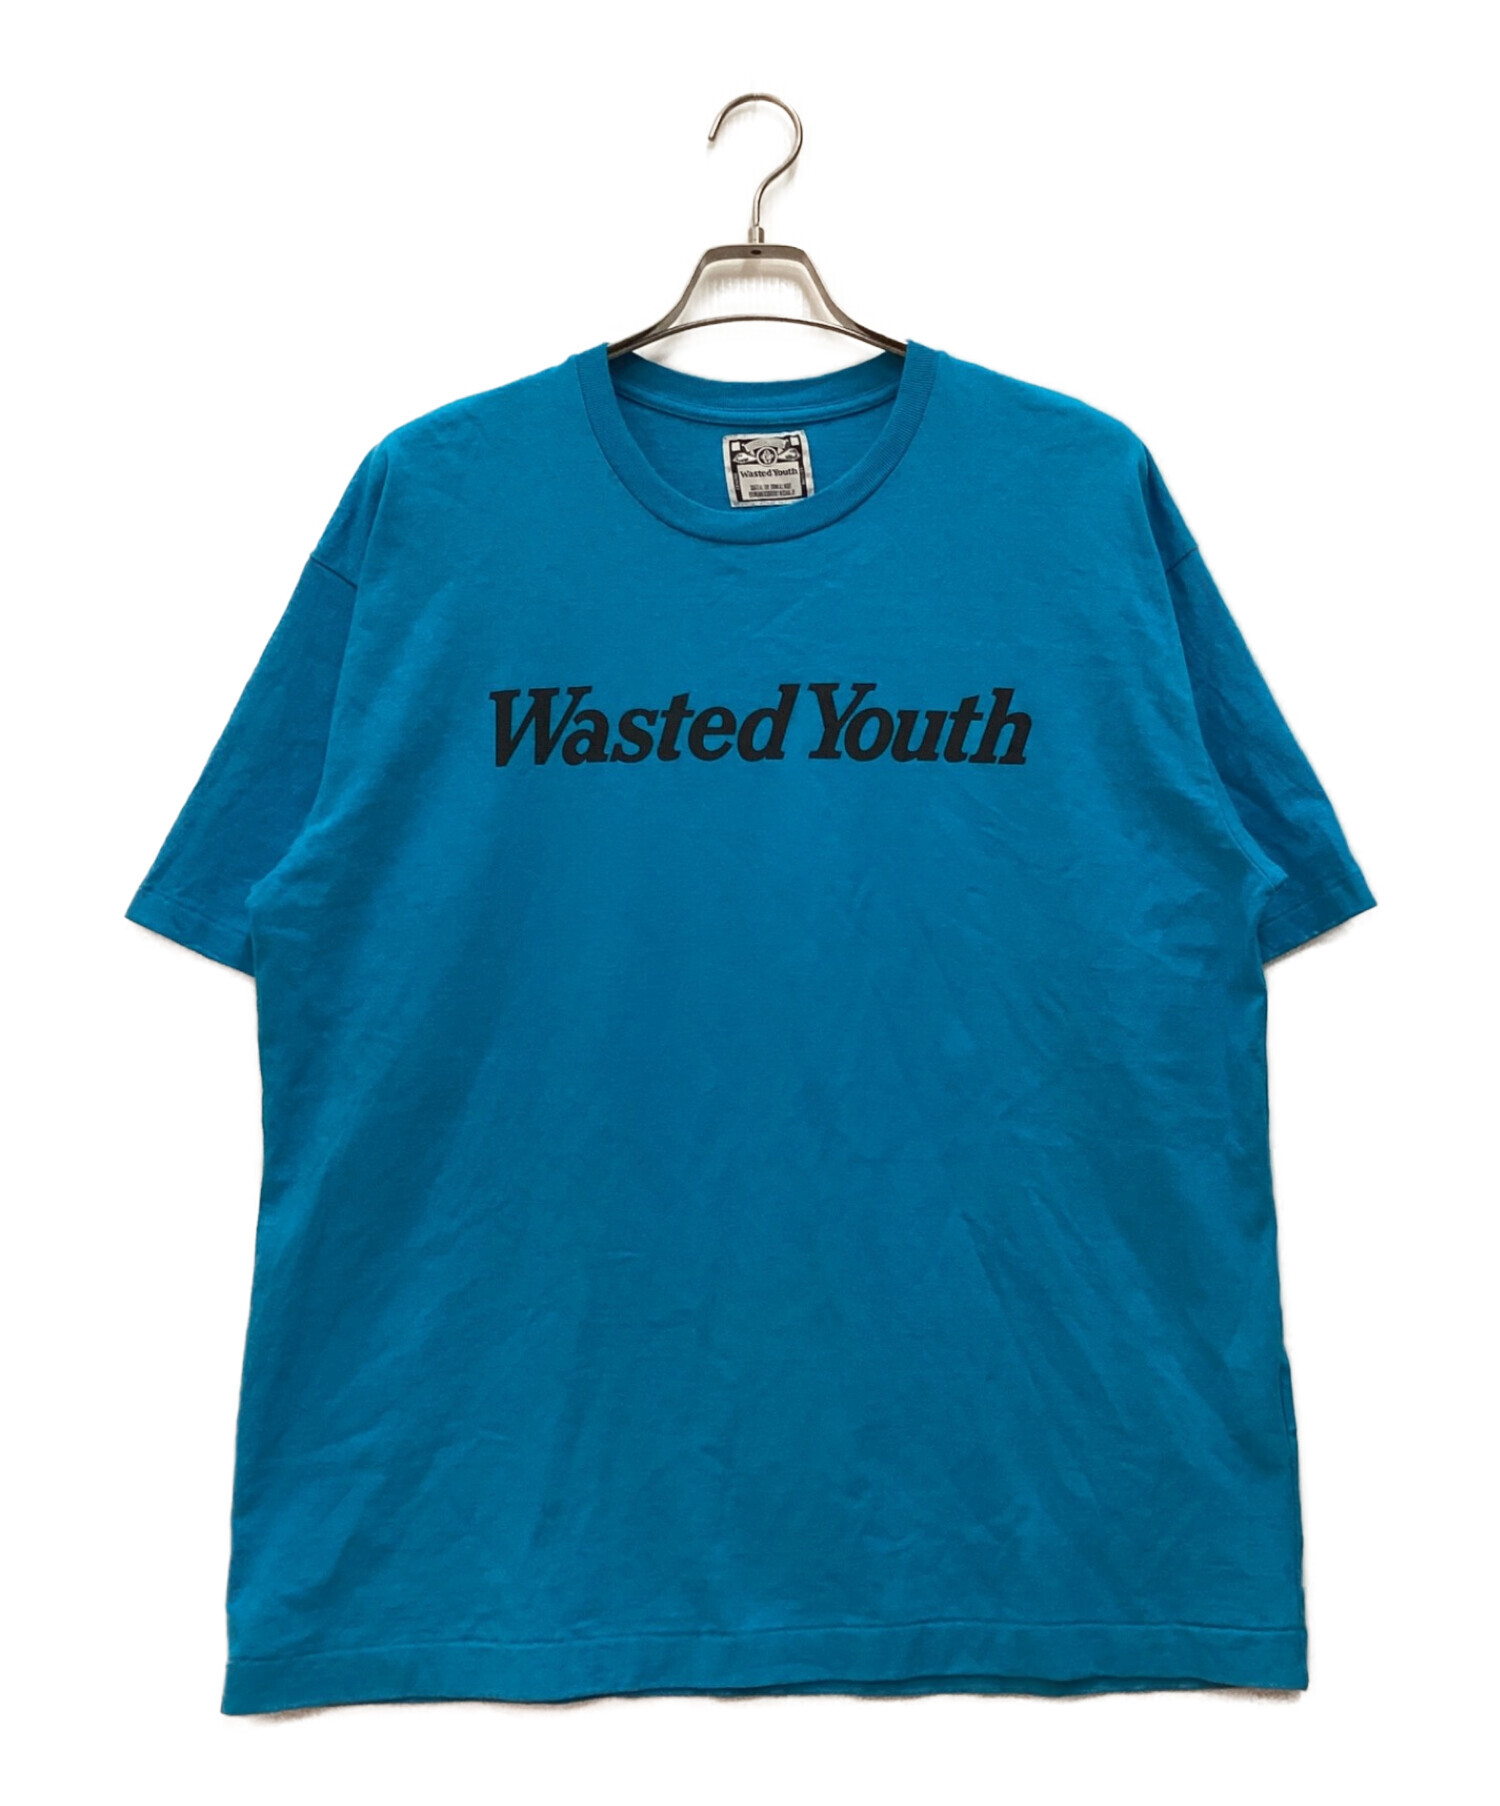 wasted youth 初期 Tシャツ VERDY XLサイズ